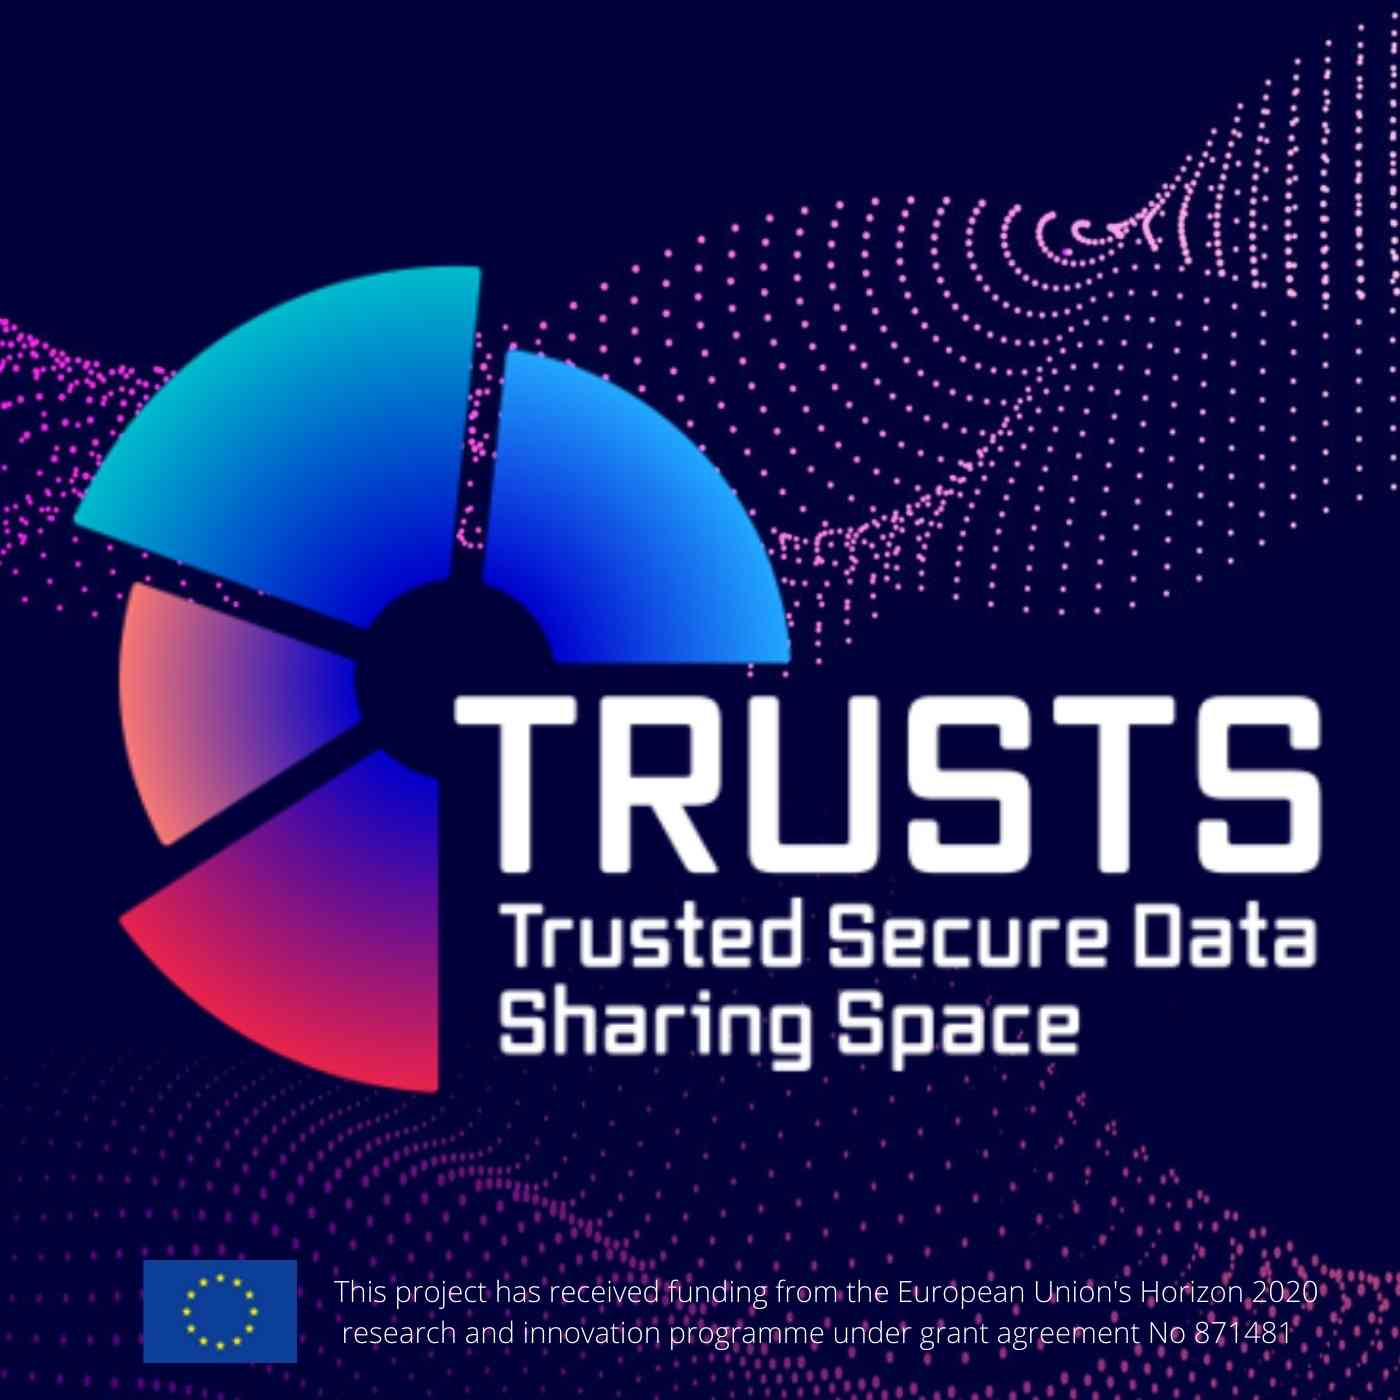 TRUSTS - Trusted Secure Data Sharing Space